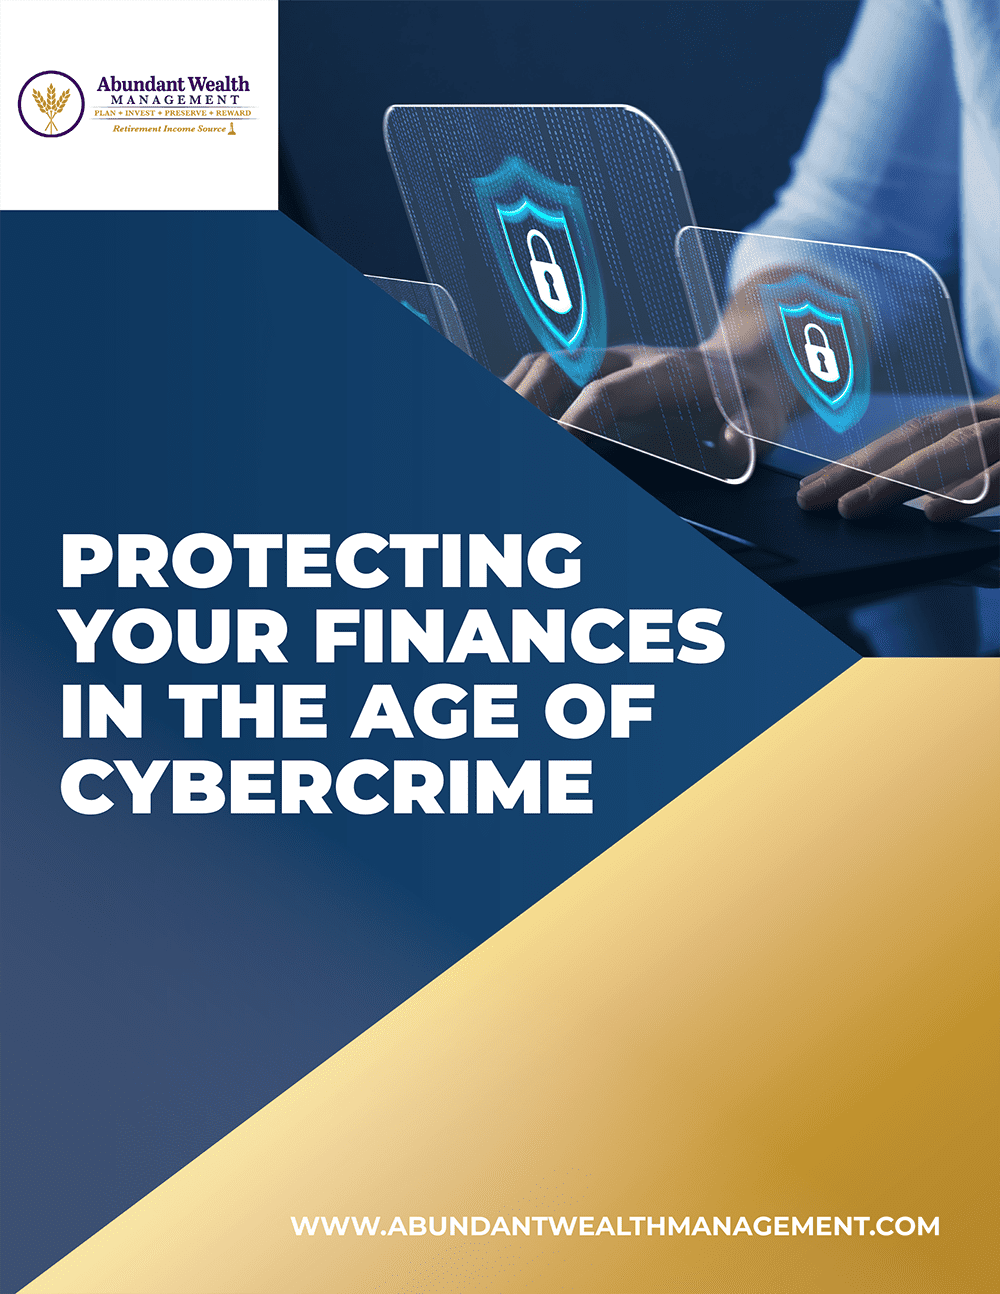 Abundant Wealth Management - Protecting Your Finances in the Age of Cybercrime-1